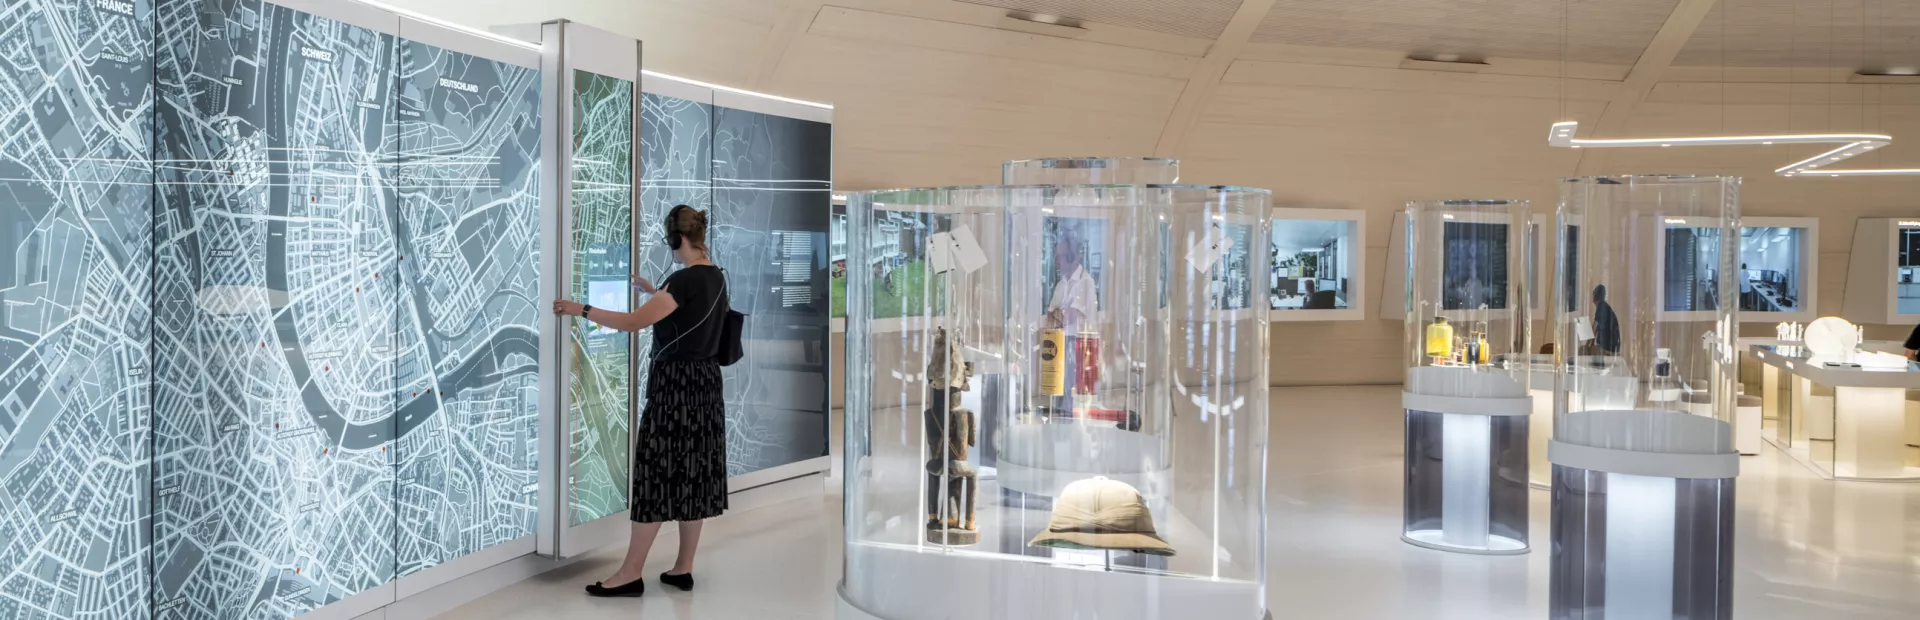 Visitor uses the time scanner from the History of Medicine section | ©Rasmus Hjortshøj - COAST